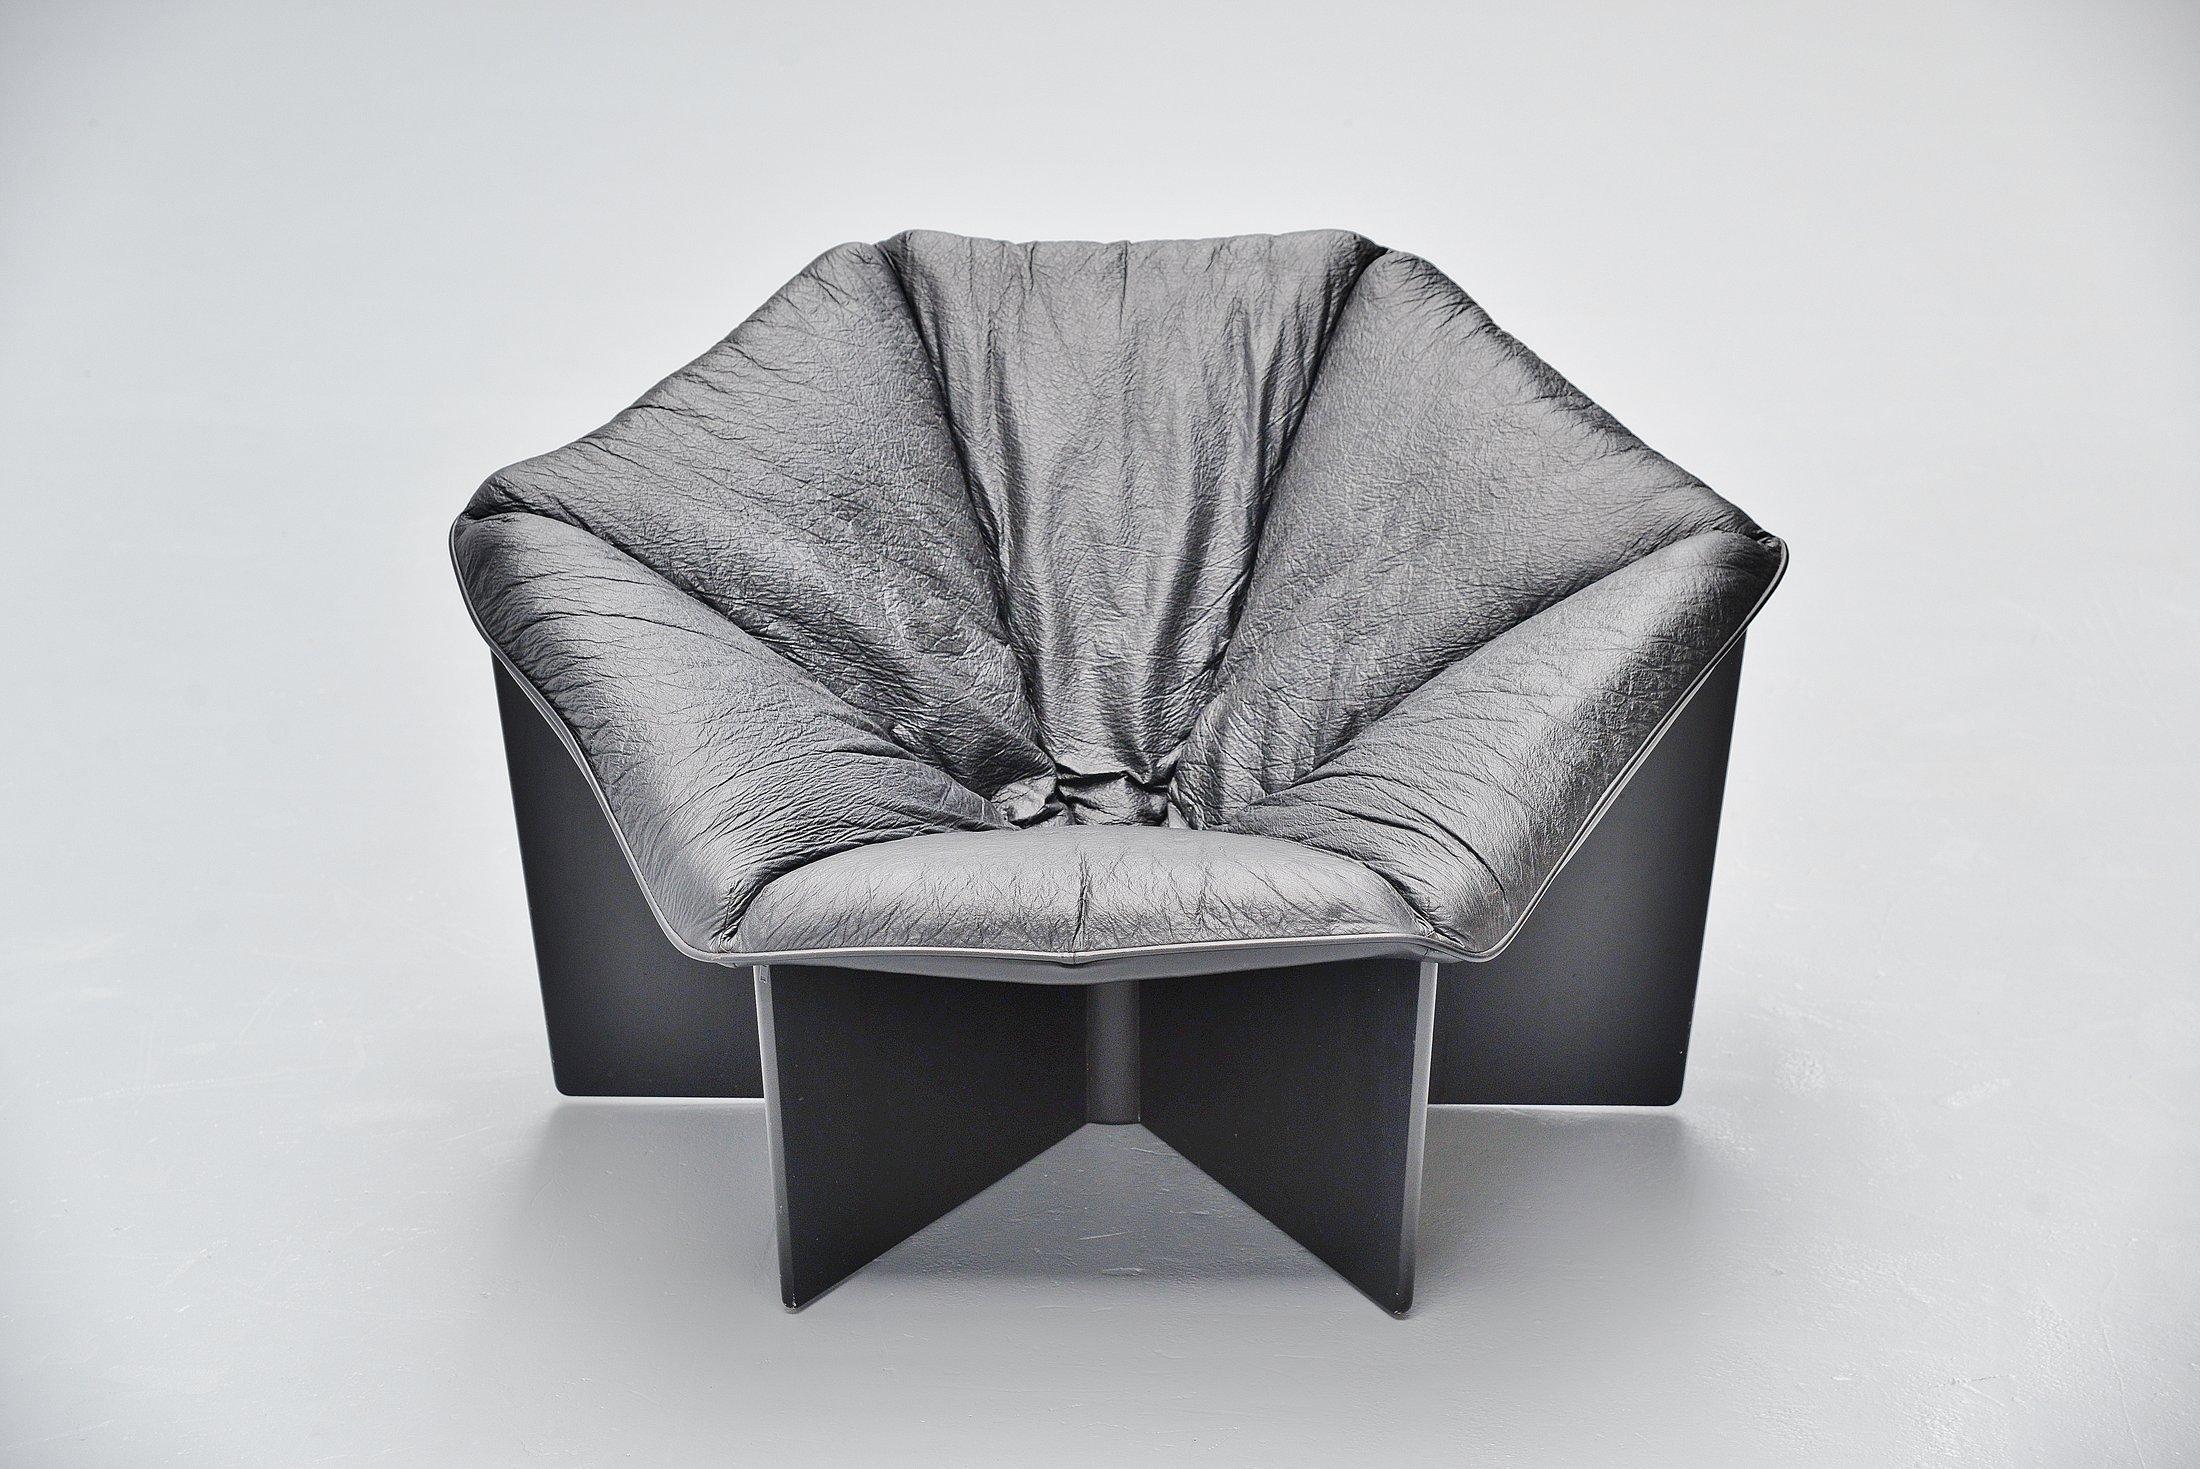 Important lounge chair model F678 designed by Pierre Paulin and manufactured by Artifort, Holland 1965. This is for the so called spider lounge chair. This chair has a plywood black lacquered base, connected with 1 nylon wire where the leather